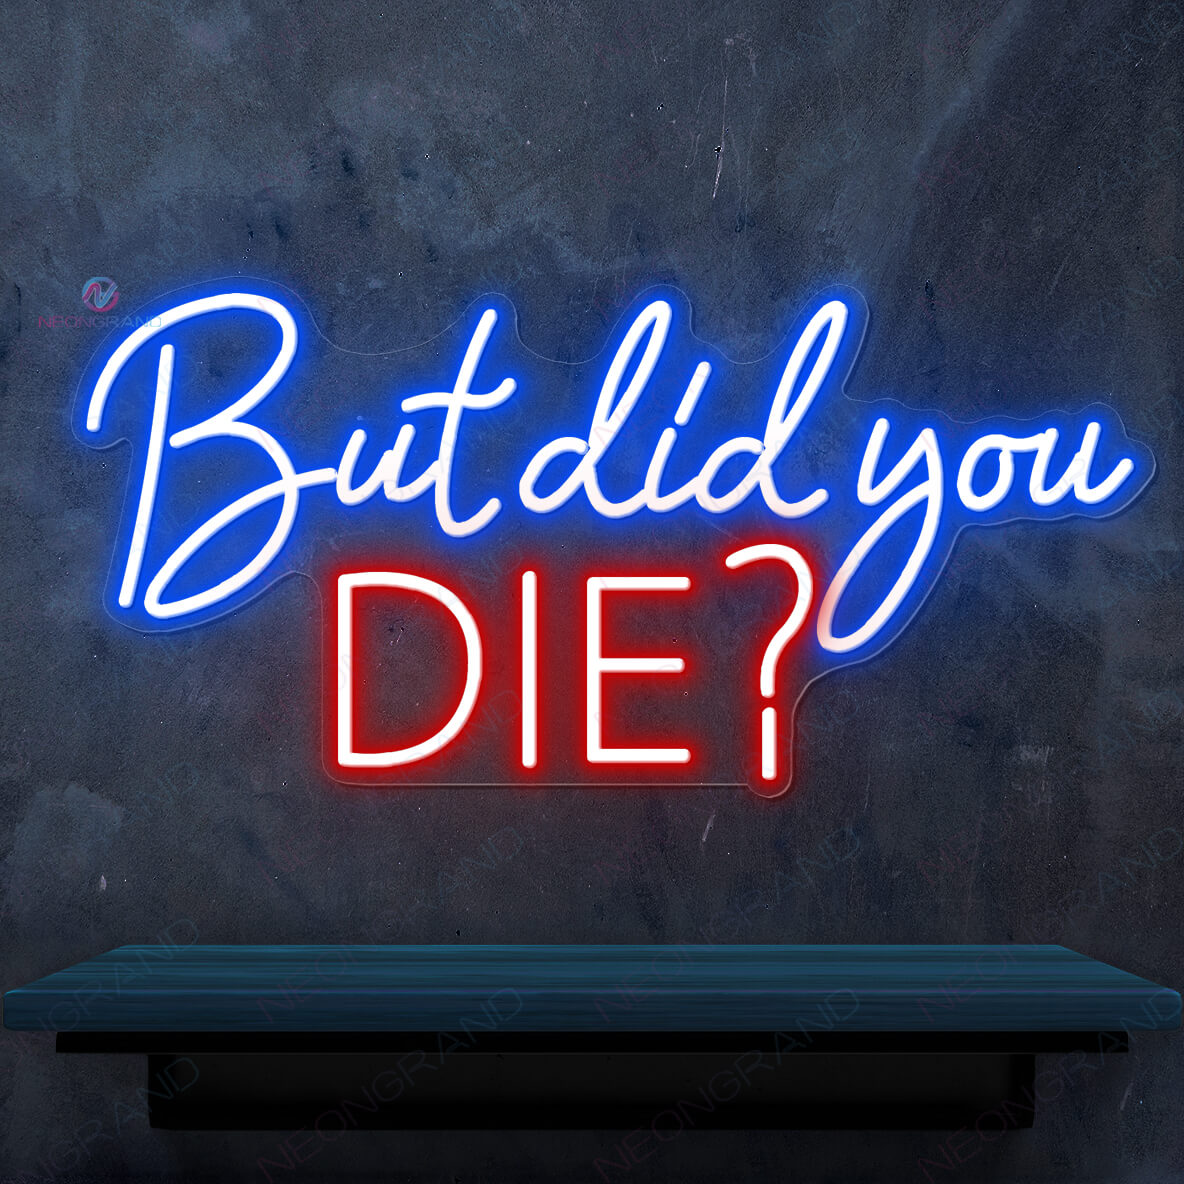 But Did You Die Neon Sign Party Led Light blue